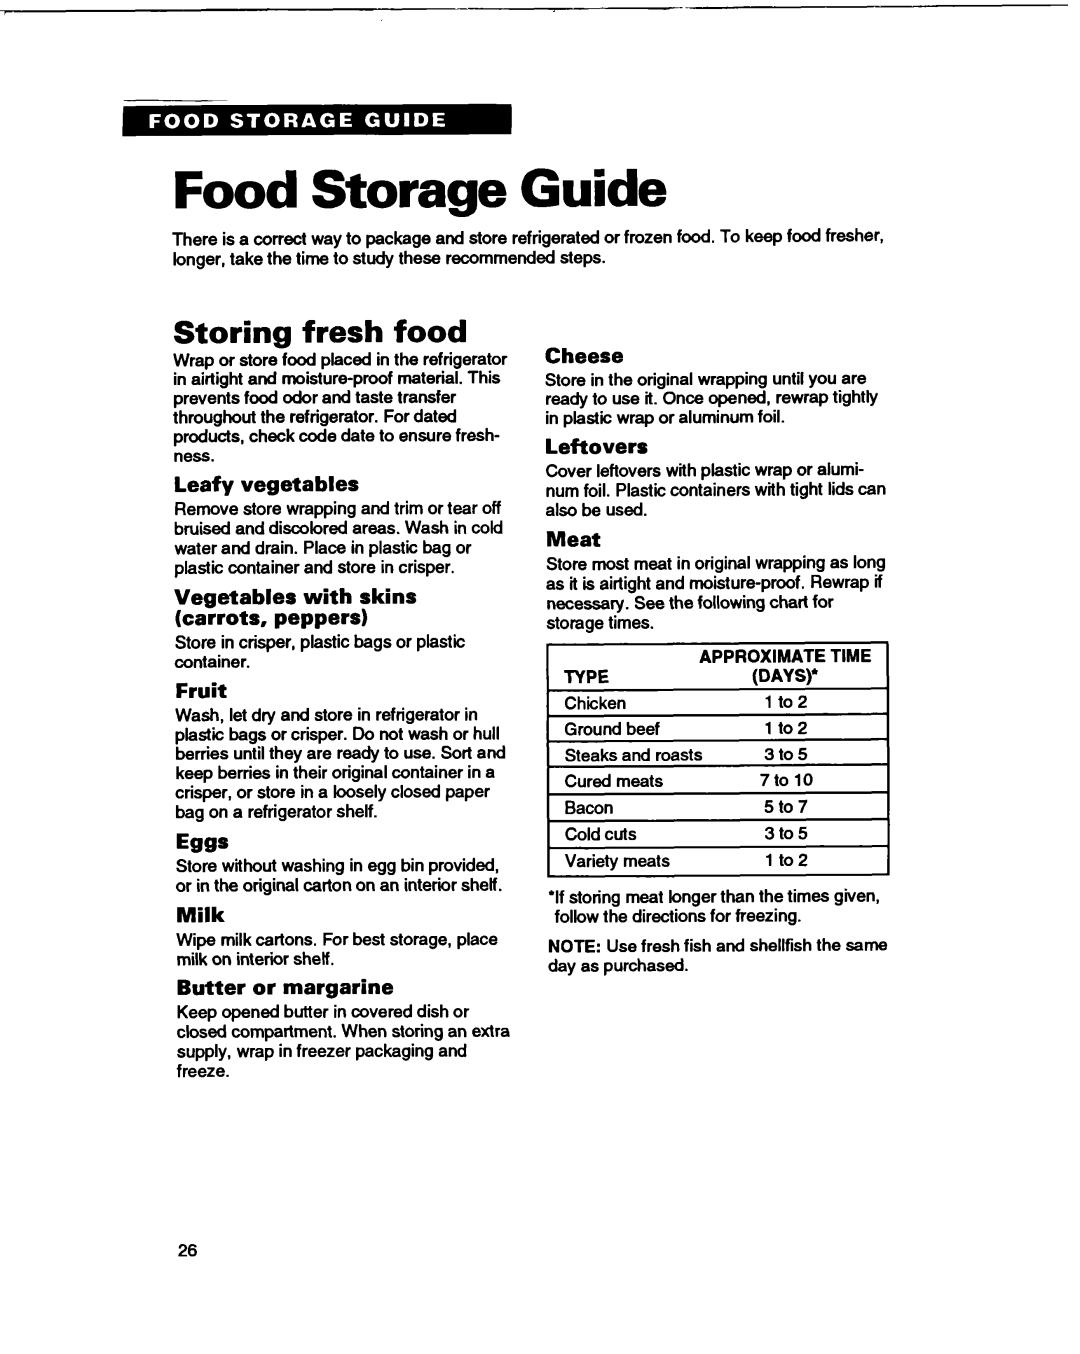 Whirlpool ED22DQ Food Storage Guide, Storing fresh food, Leafy vegetables, Vegetables with skins carrots, peppers, Fruit 